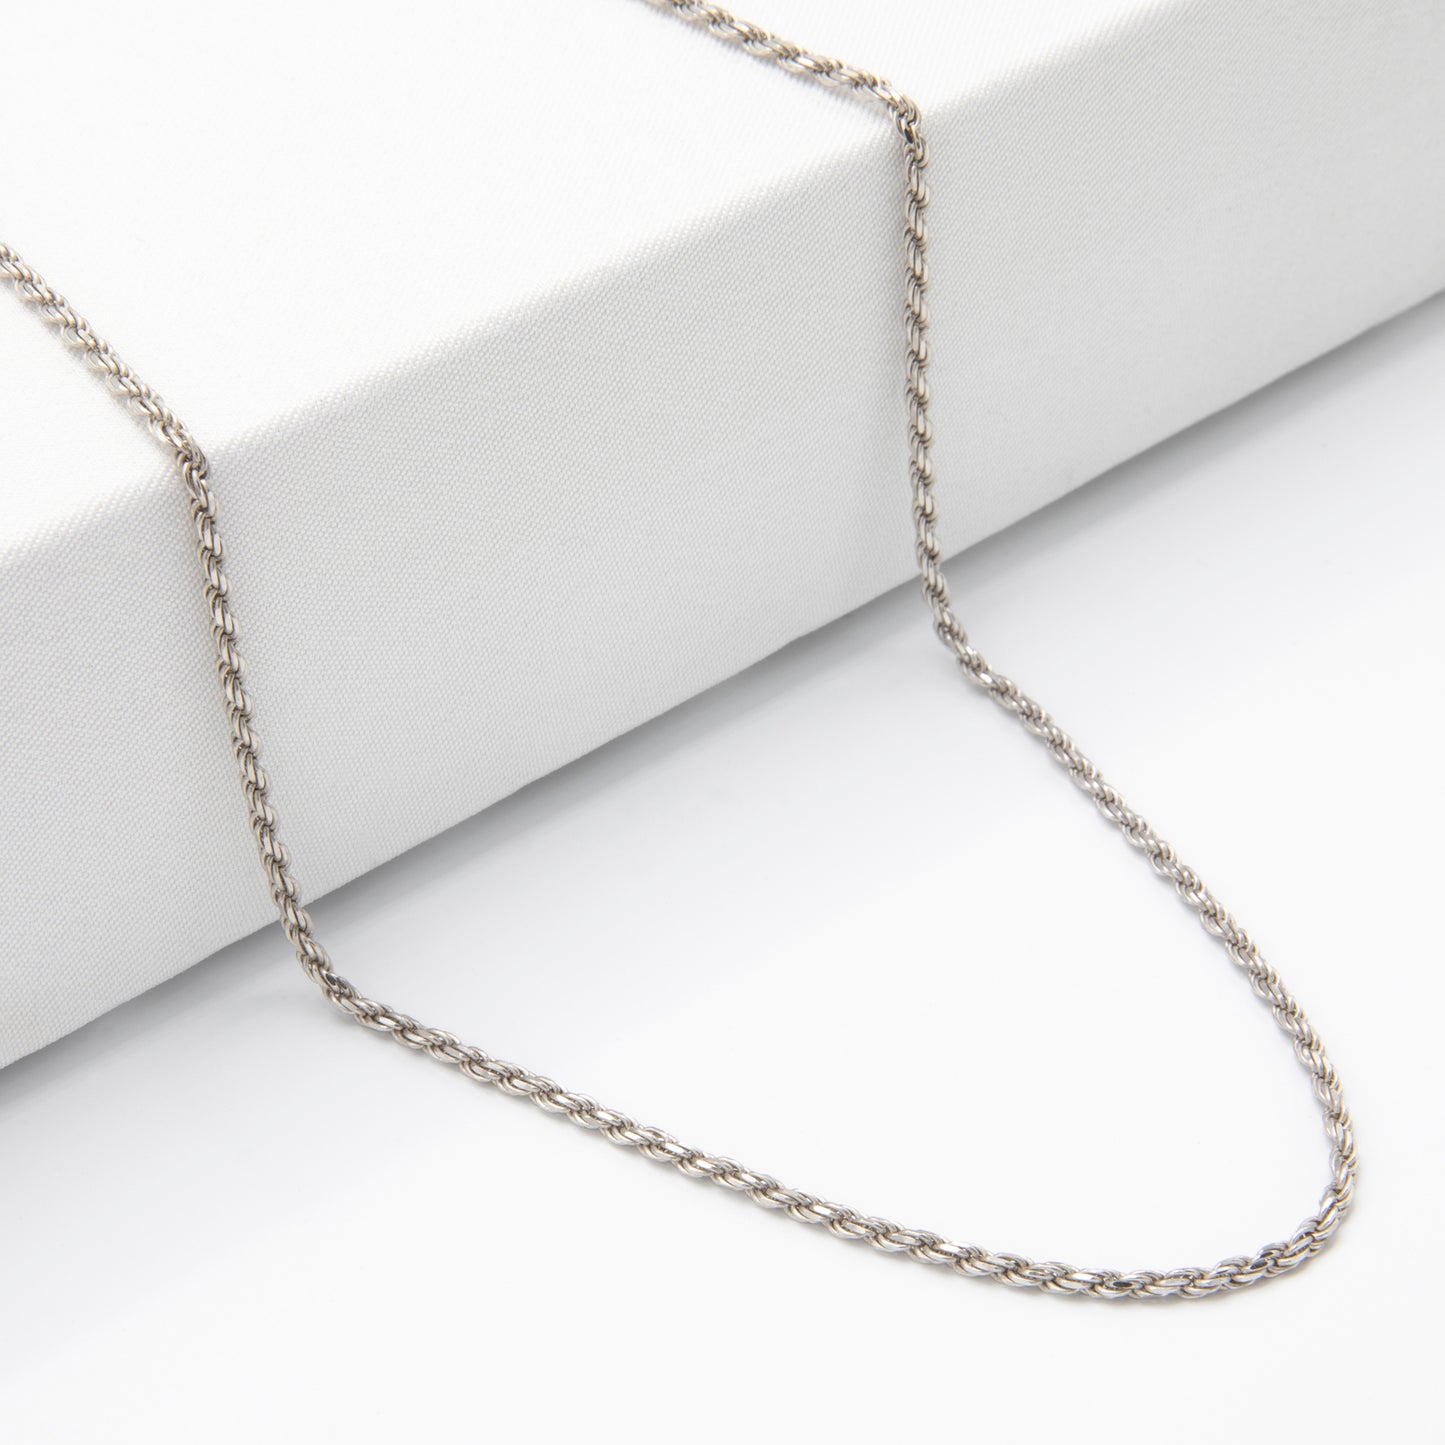 Rhodium-Plated 925 Sterling Silver Rope Chain